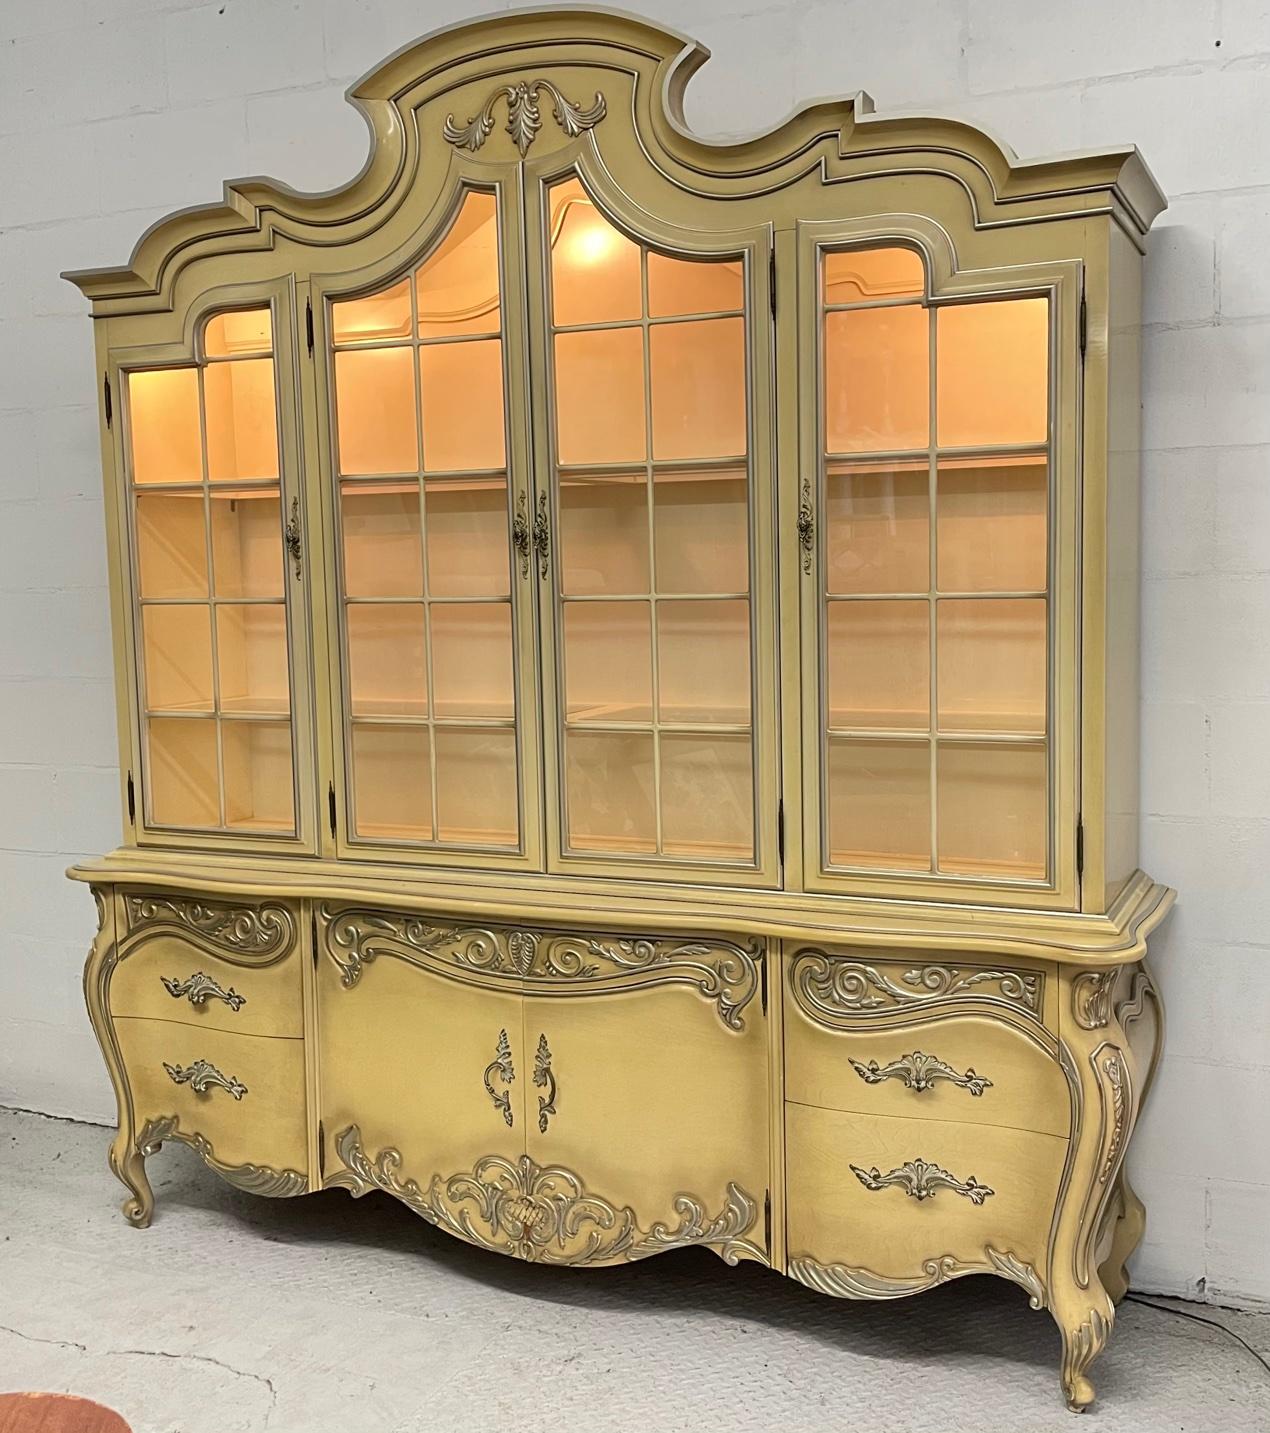 Large lighted dining cabinet by Romweber in ornate French Rococo style features lighted interior and onlays of cartouche design elements. Good condition with minor imperfections consistent with age.